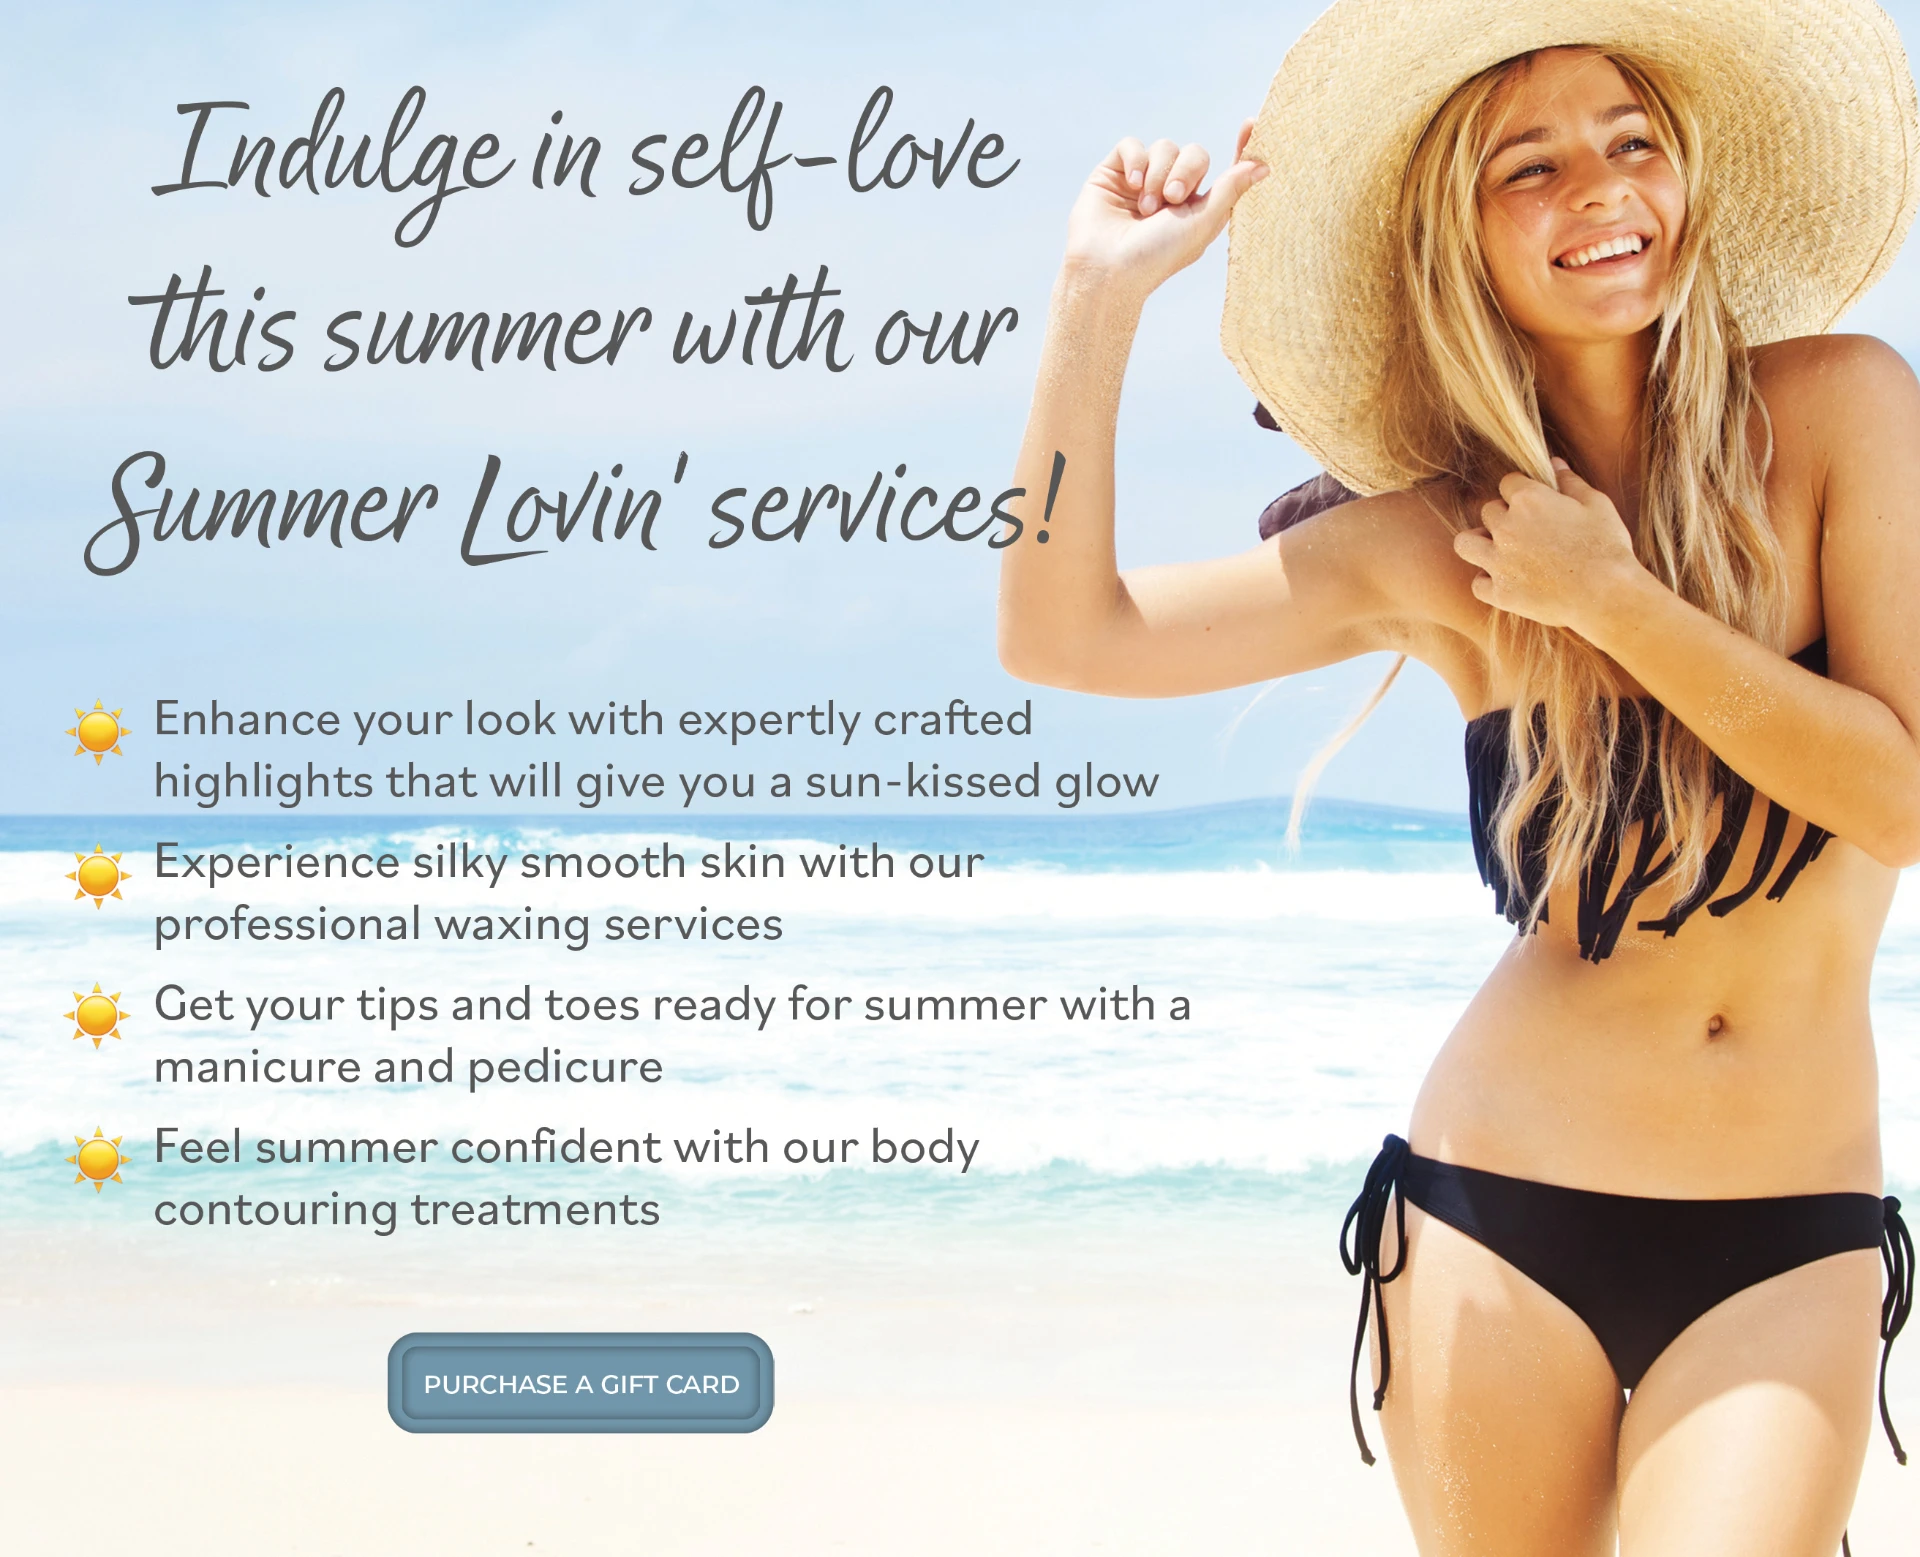 Indulge in self-love this summer with our Summer Lovin' services! Enhance your look with expertly crafted highlights that will give you a sun-kissed glow. Experience silky smooth skin with our professional waxing services. Get your tips and toes ready for summer with a manicure and pedicure. Feel summer confident with our body contouring treatments.